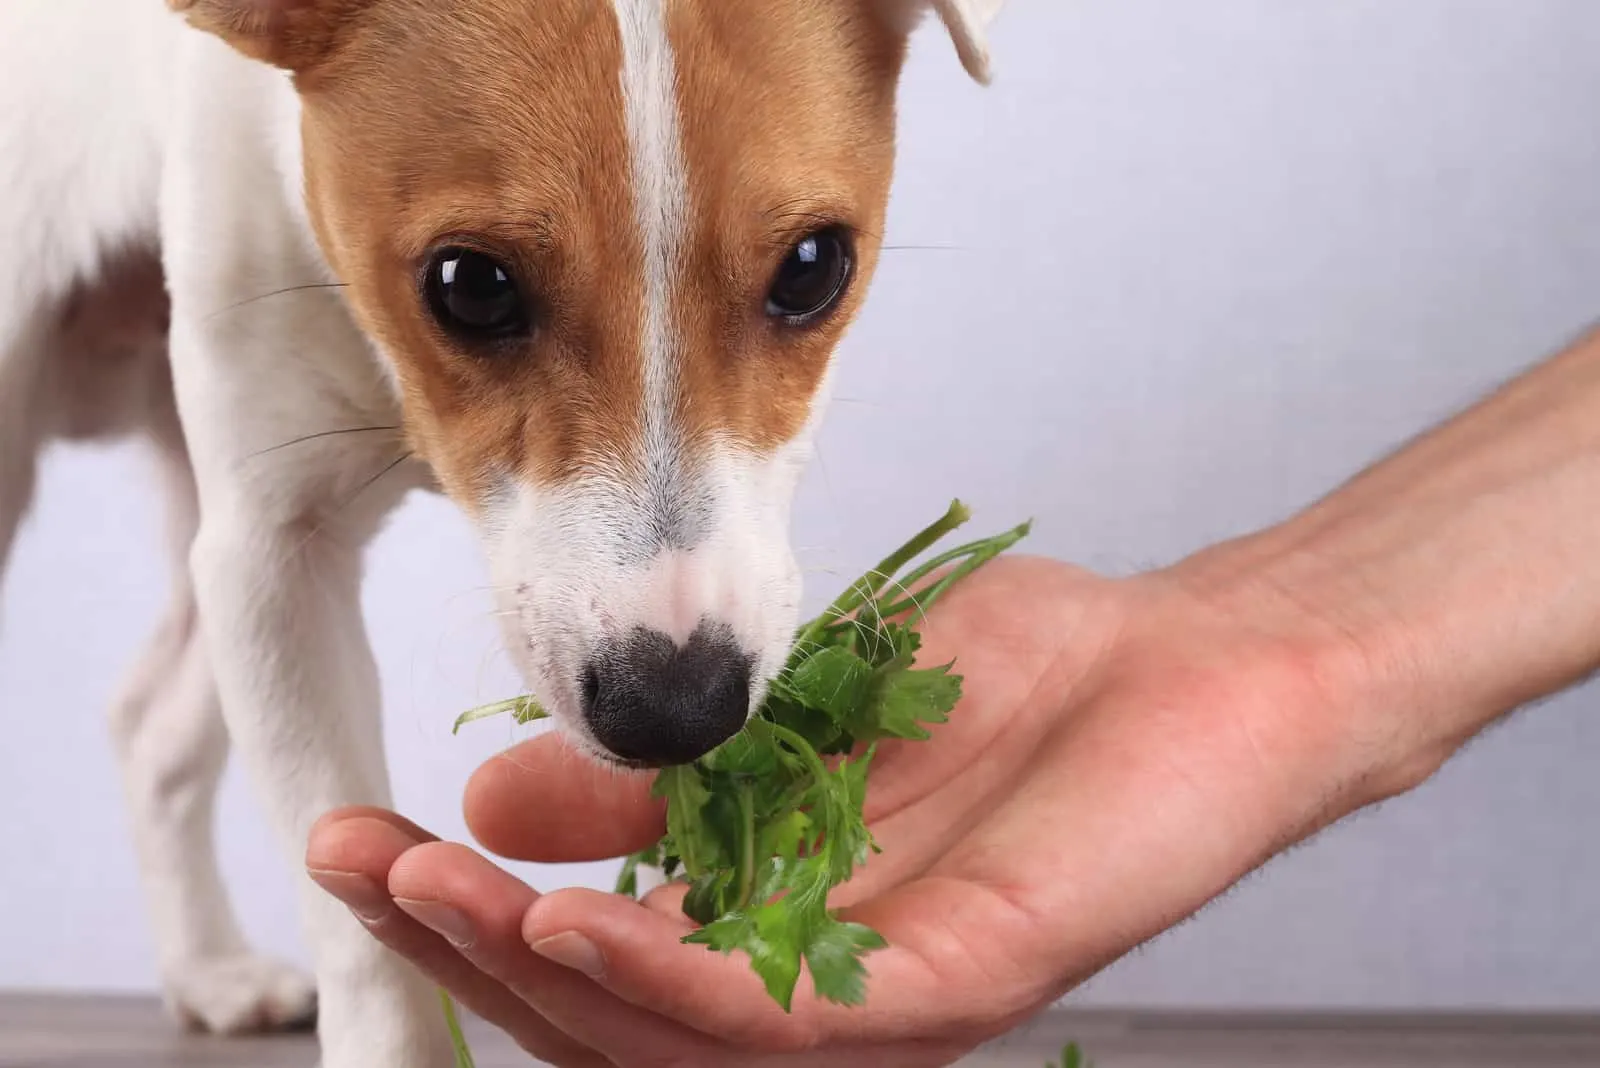 jack russell eats parsley from a man's hand